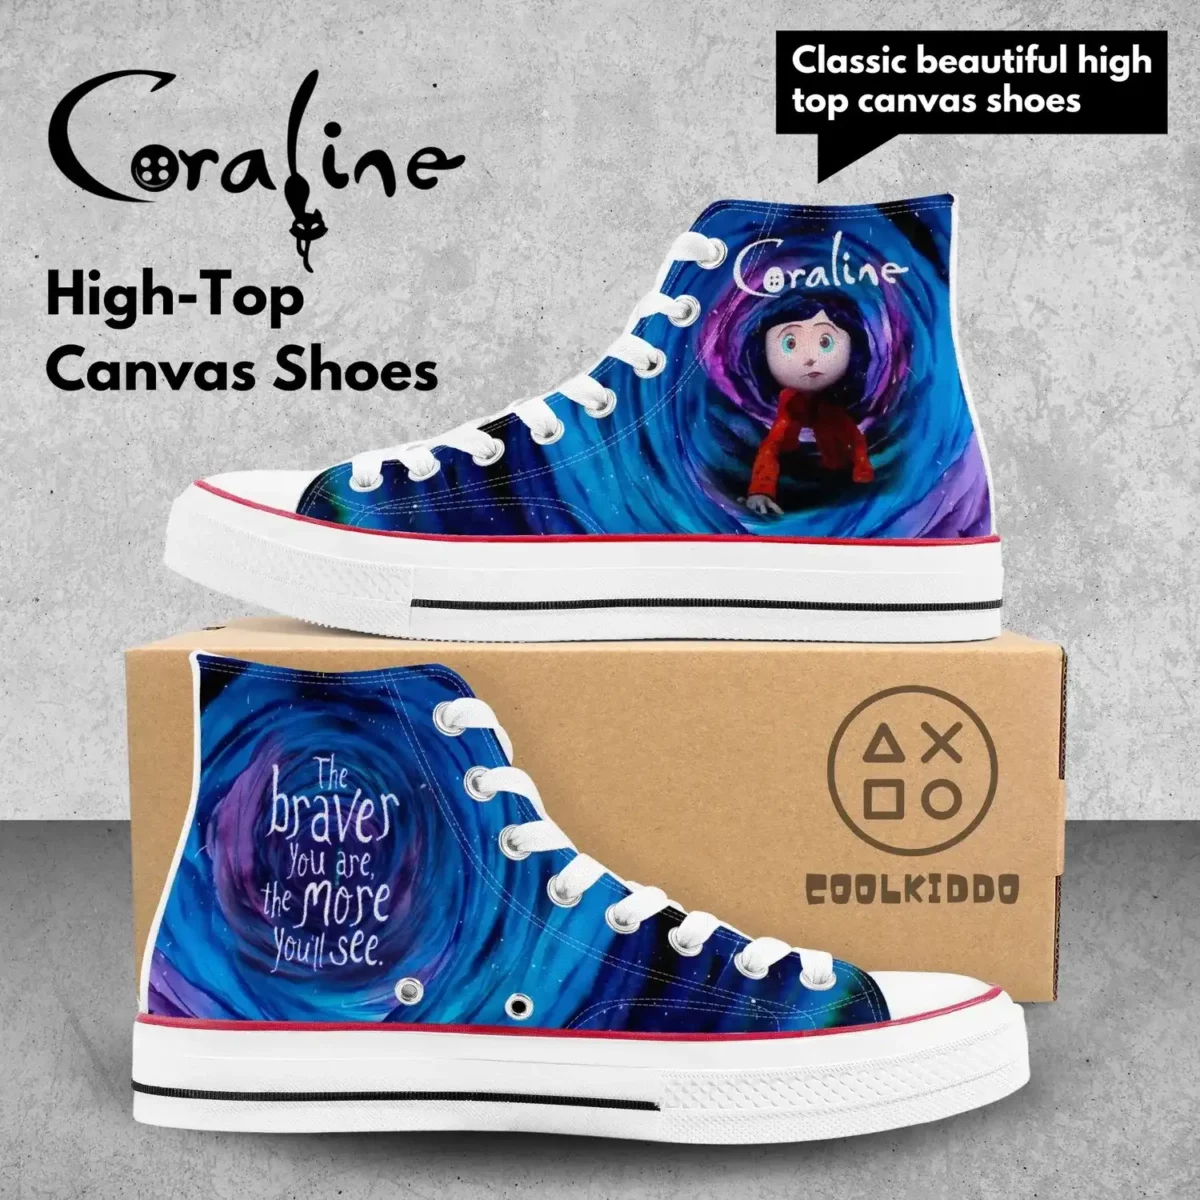 Custom Coraline High-Top Canvas Sneakers, Tim Burton’s animated movie Inspired Casual Shoes for Youth/Adults Cool Kiddo 10